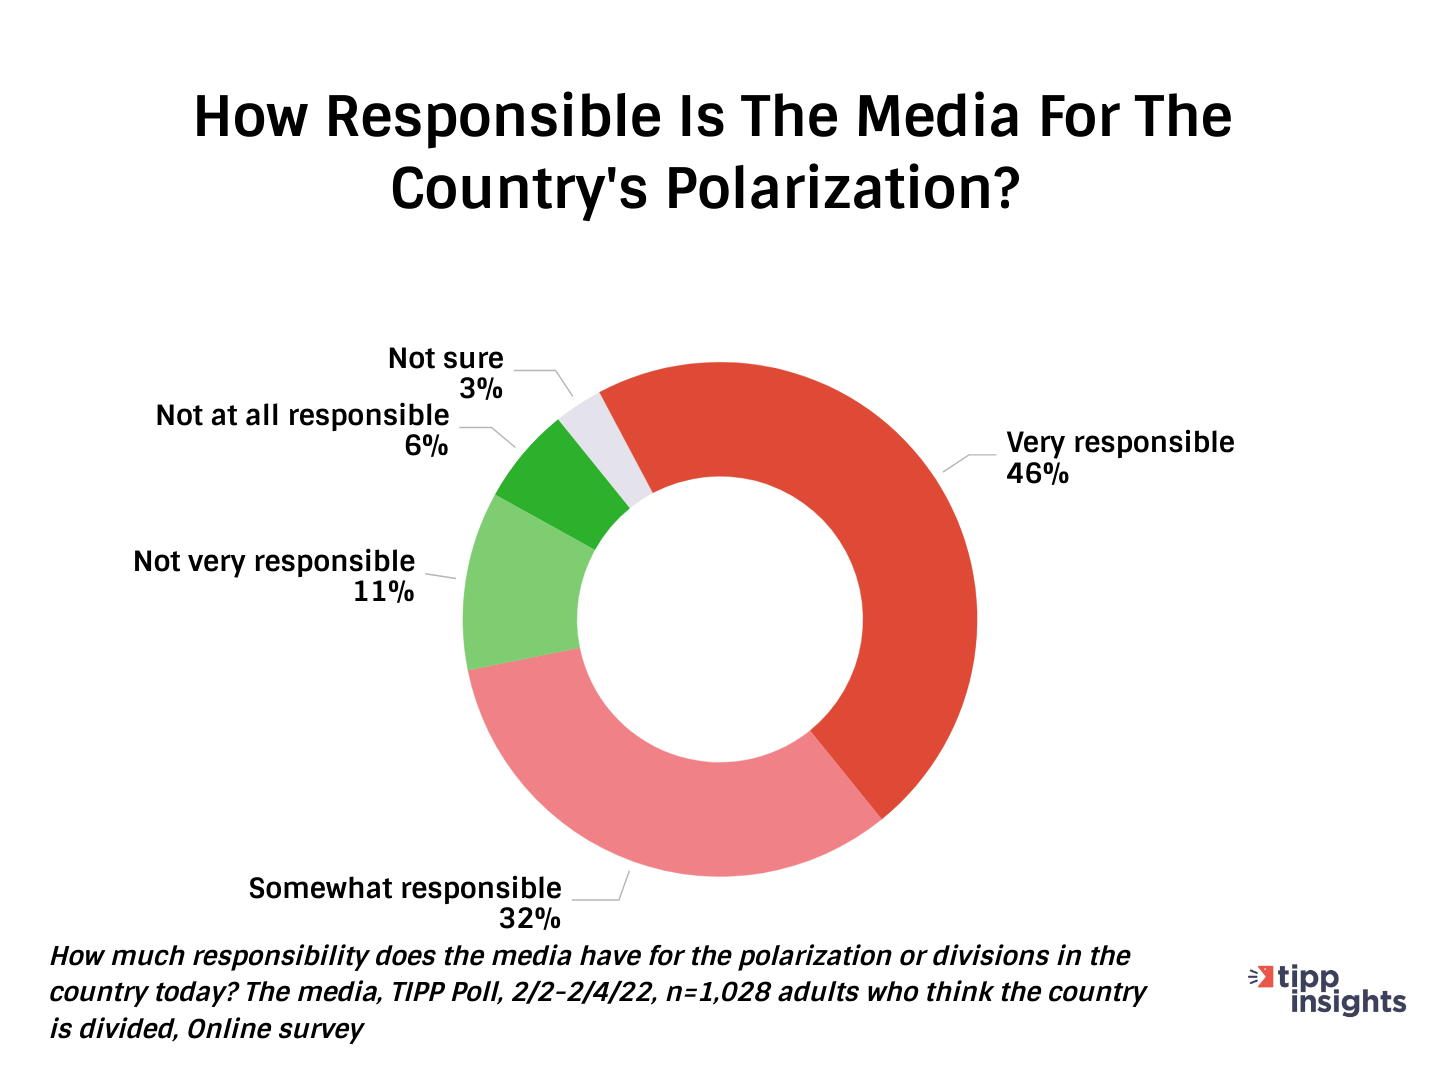 How responsible is the media for the country's polarization?